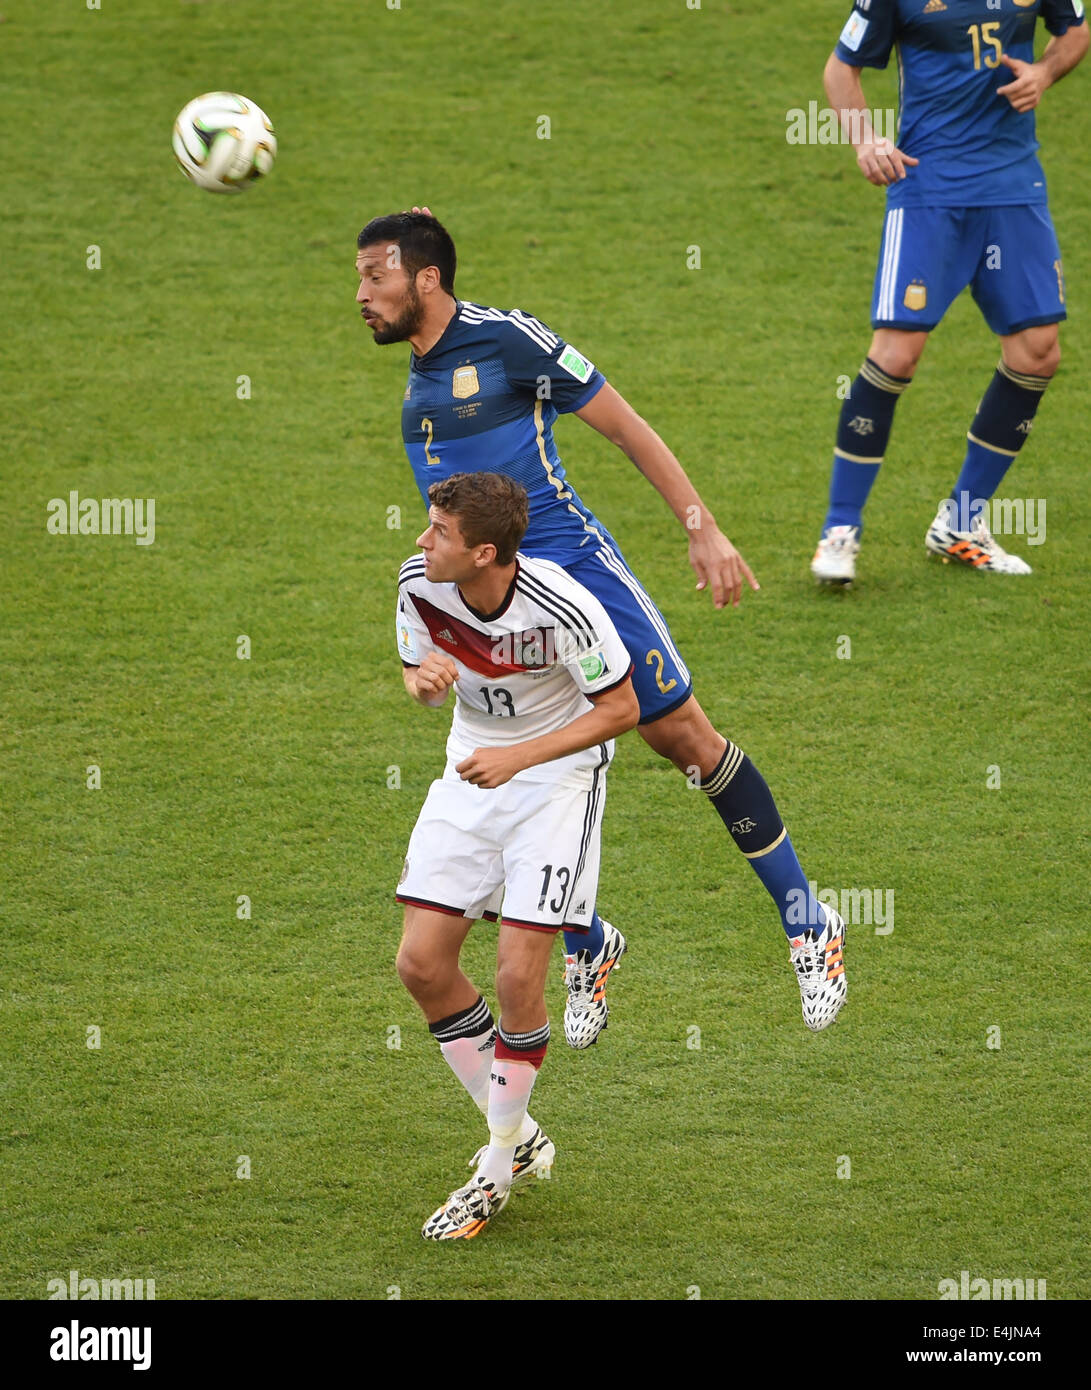 Rio De Janeiro, Brazil. 13th July, 2014. Germany's Thomas Muller vies with Argentina's Ezequiel Garay during the final match between Germany and Argentina of 2014 FIFA World Cup at the Estadio do Maracana Stadium in Rio de Janeiro, Brazil, on July 13, 2014. Credit:  Li Ga/Xinhua/Alamy Live News Stock Photo